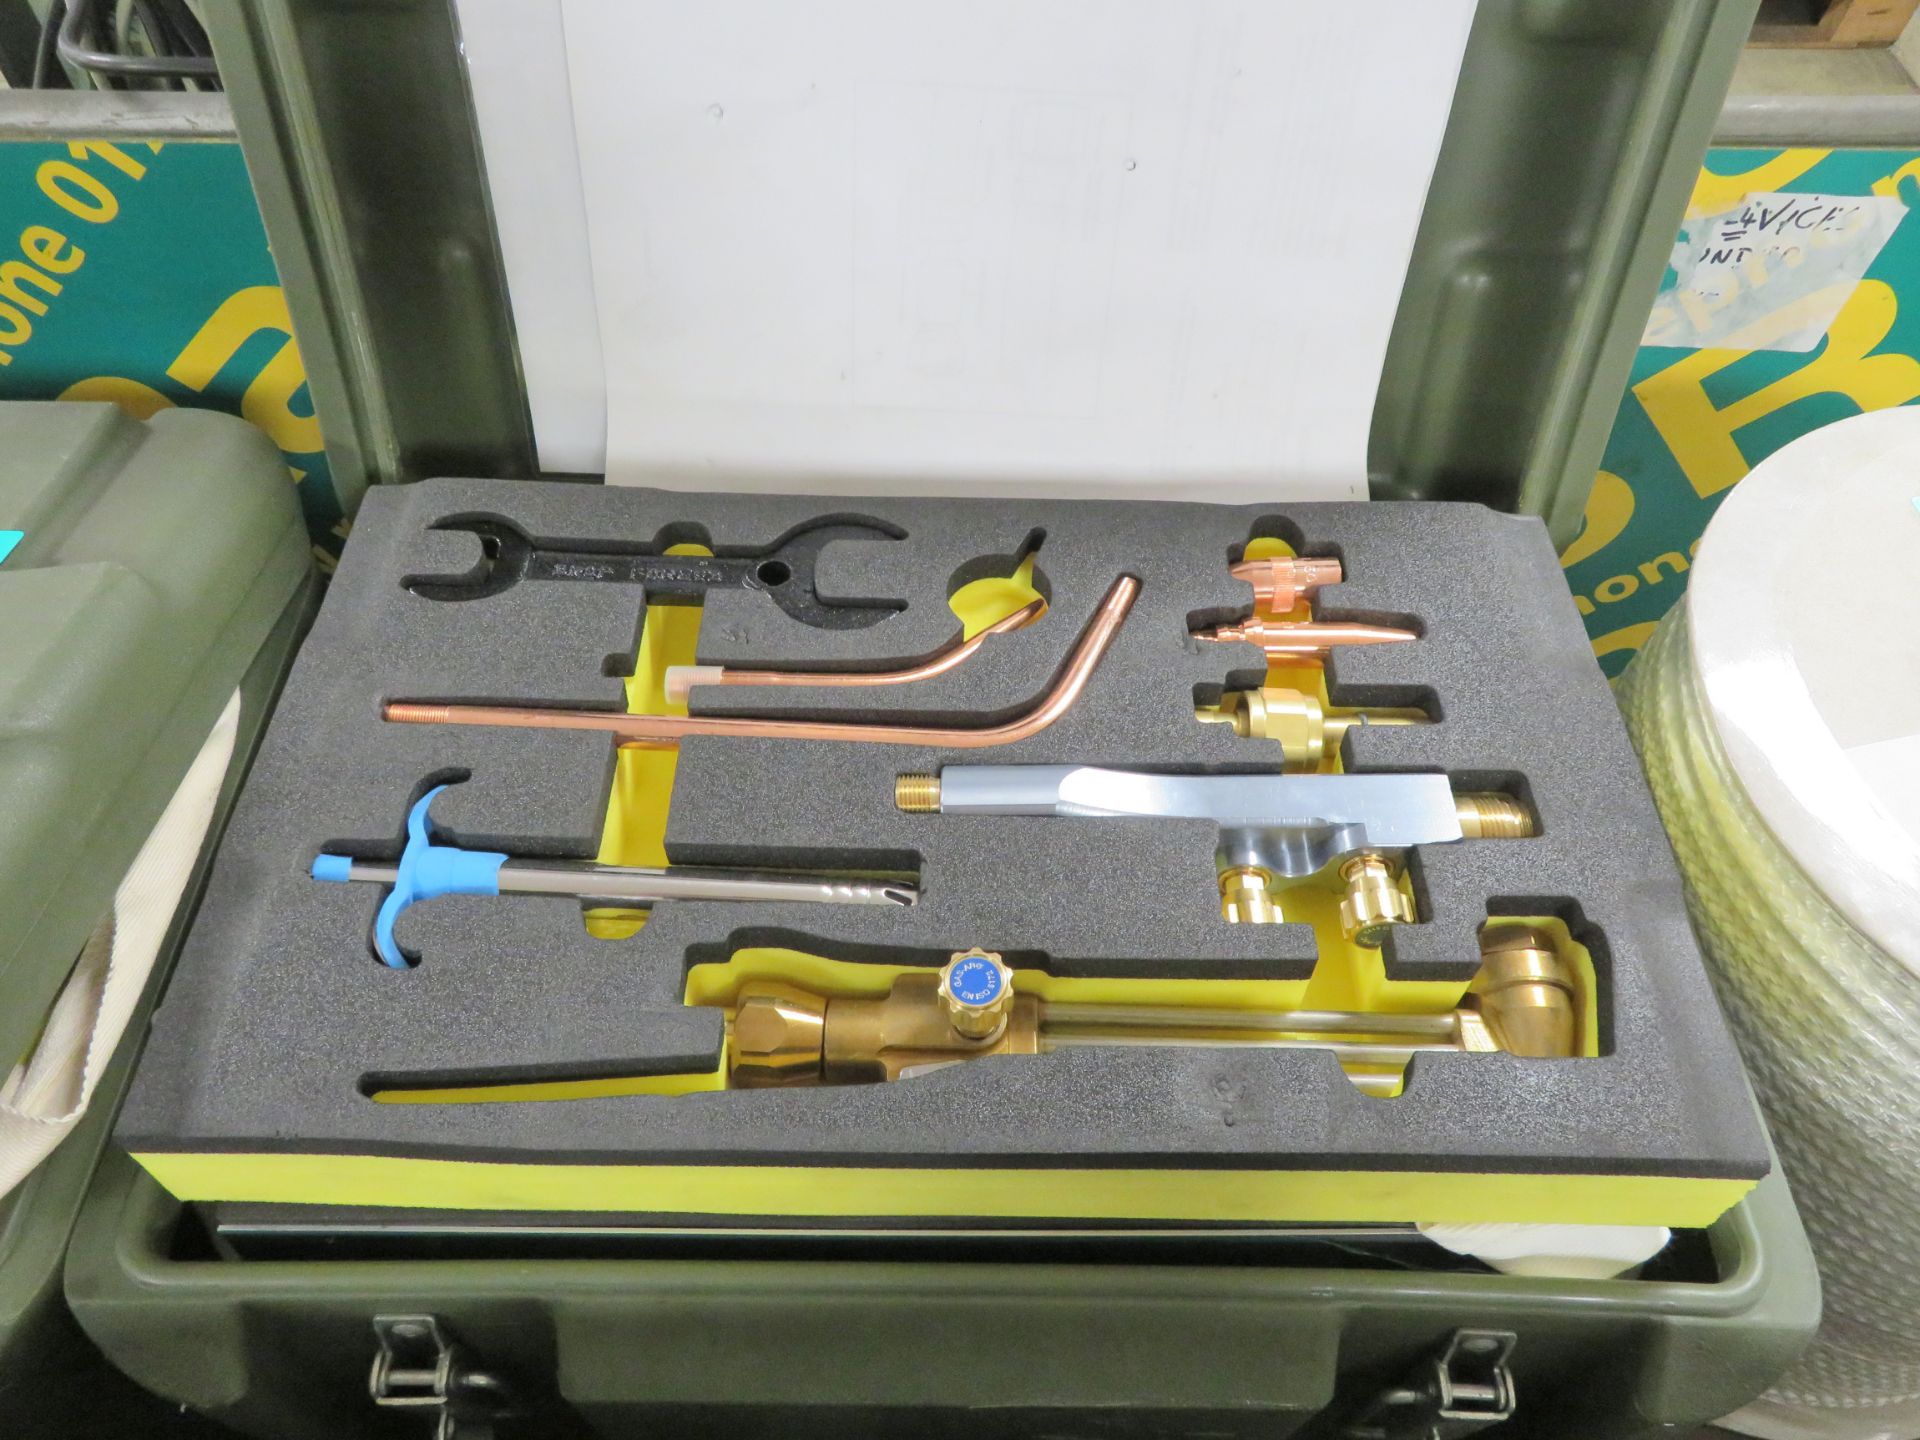 Welding Torch Outfit Cased - nozzles, hoses, connectors - Image 3 of 7